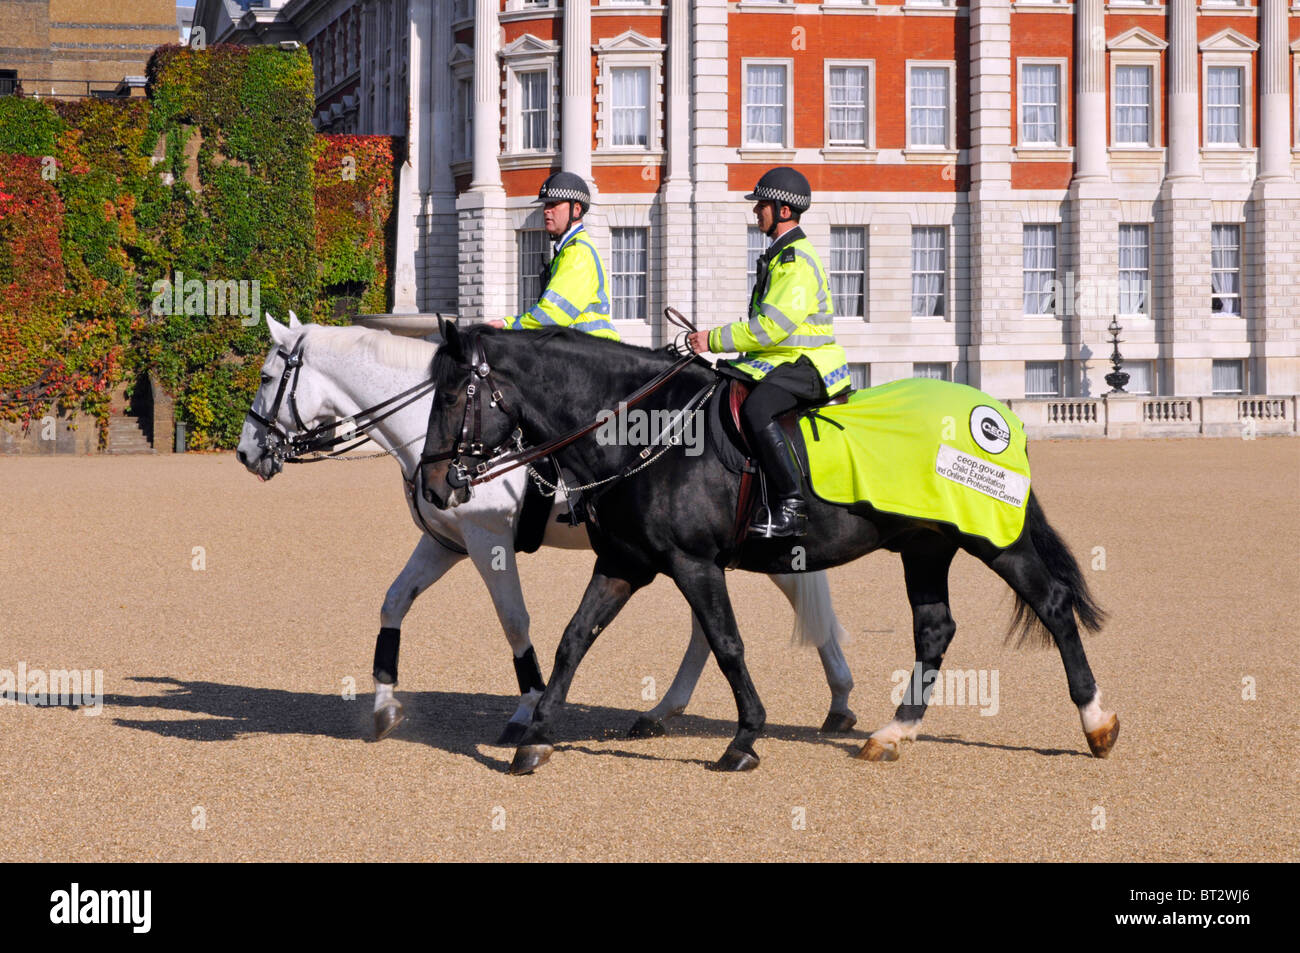 Horse Guards Parade Ground two mounted Metropolitan police officers riding bay & grey horses conspicuous high visibility clothing in London England UK Stock Photo